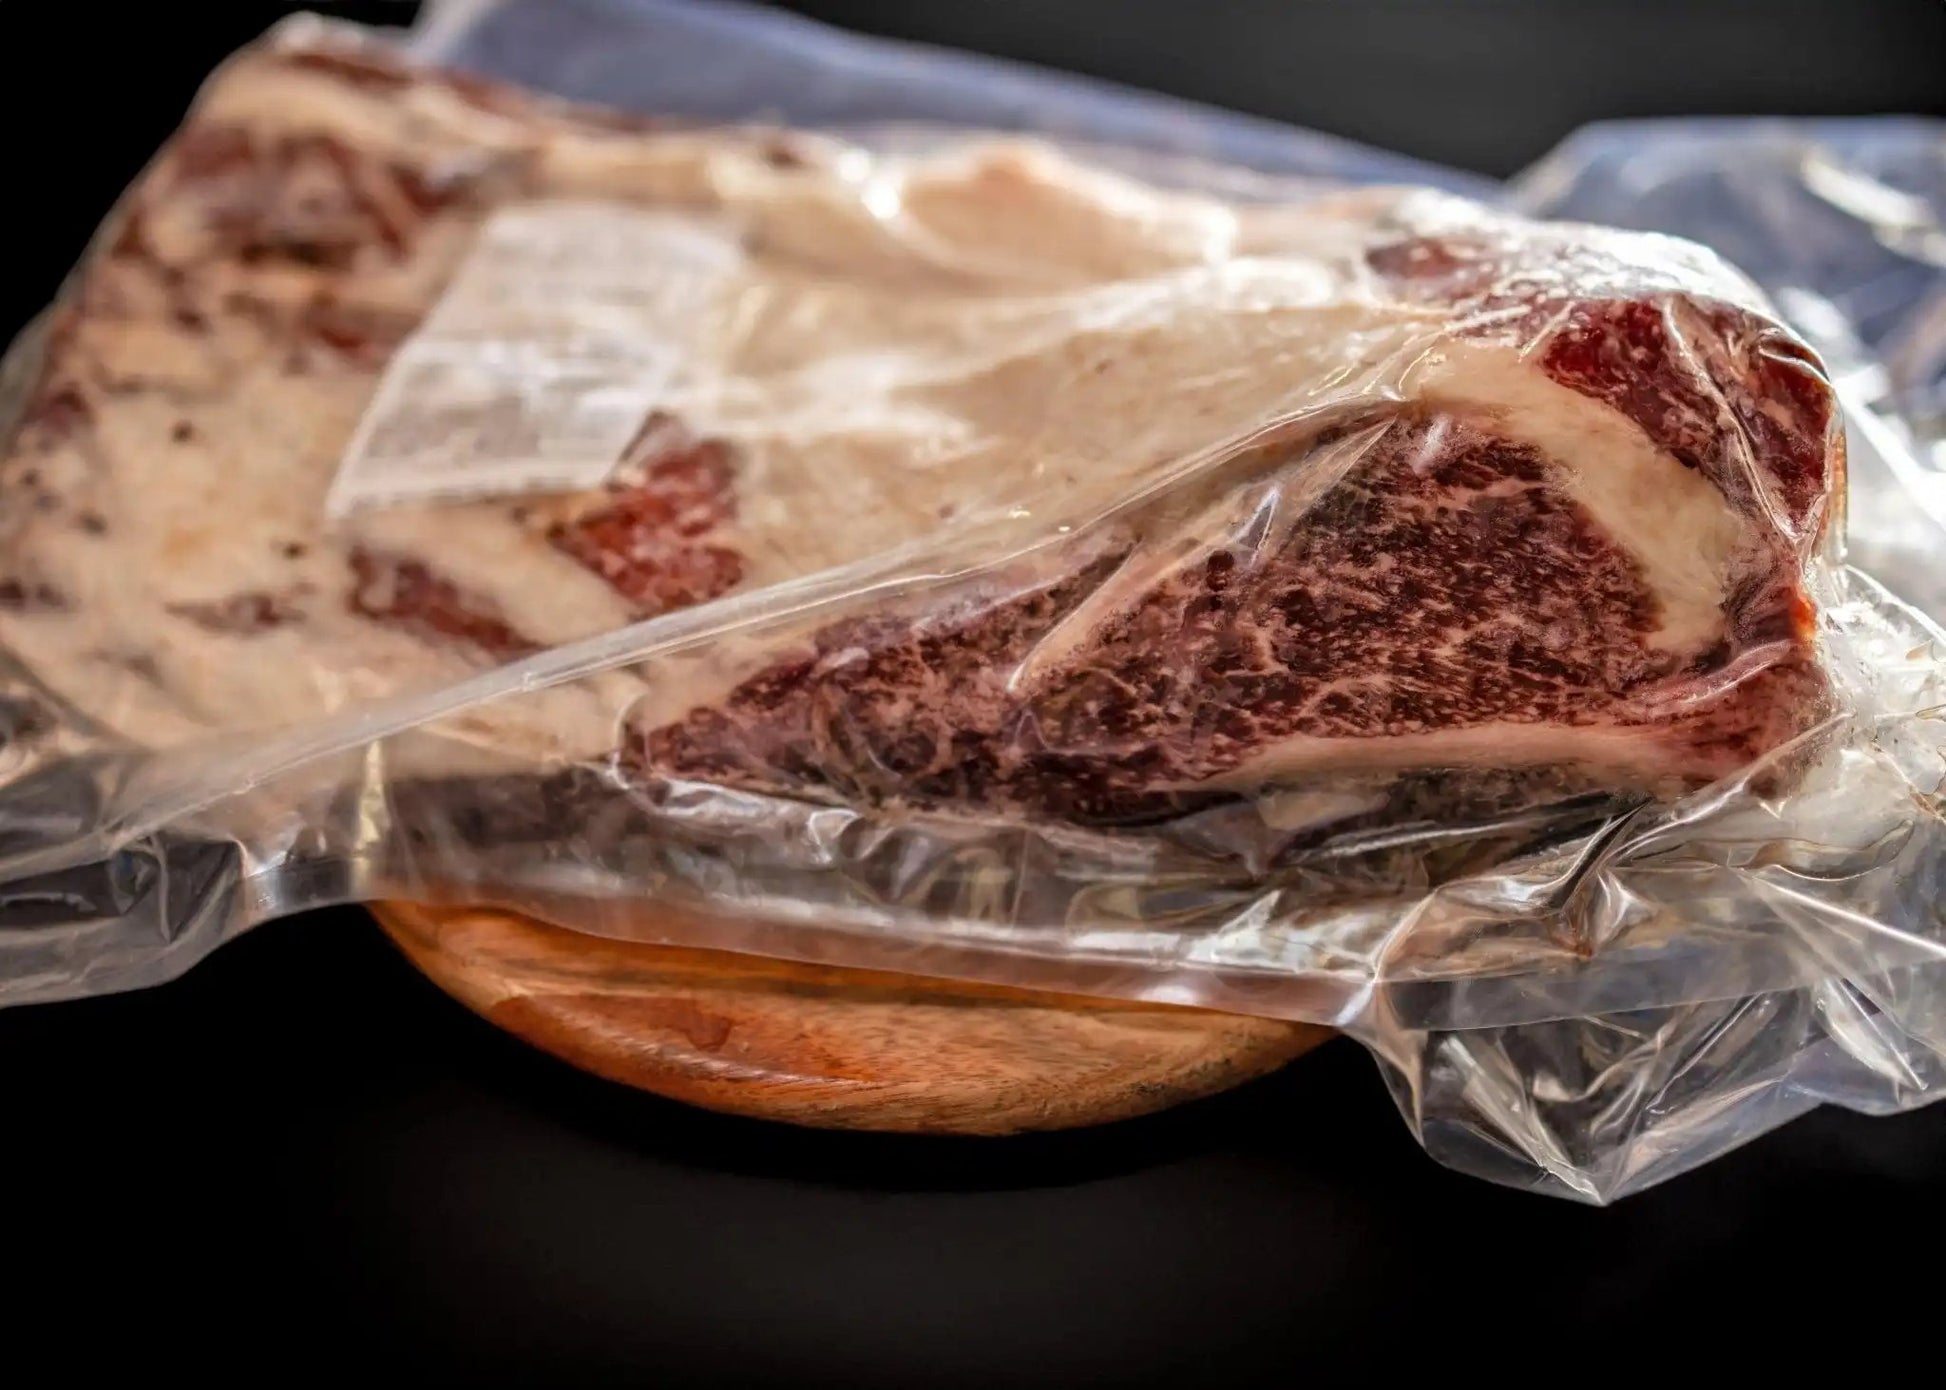 100% All-Natural Grass-Fed Pasture-Raised Wagyu BrisketIndulge in the ultimate beef experience with Hufeisen Ranch's 100% All-Natural Grass-Fed Pasture-Raised Wagyu Brisket. Known for its rich flavor and unreal marbling,100%The Hufeisen-Ranch (WYO Wagyu)